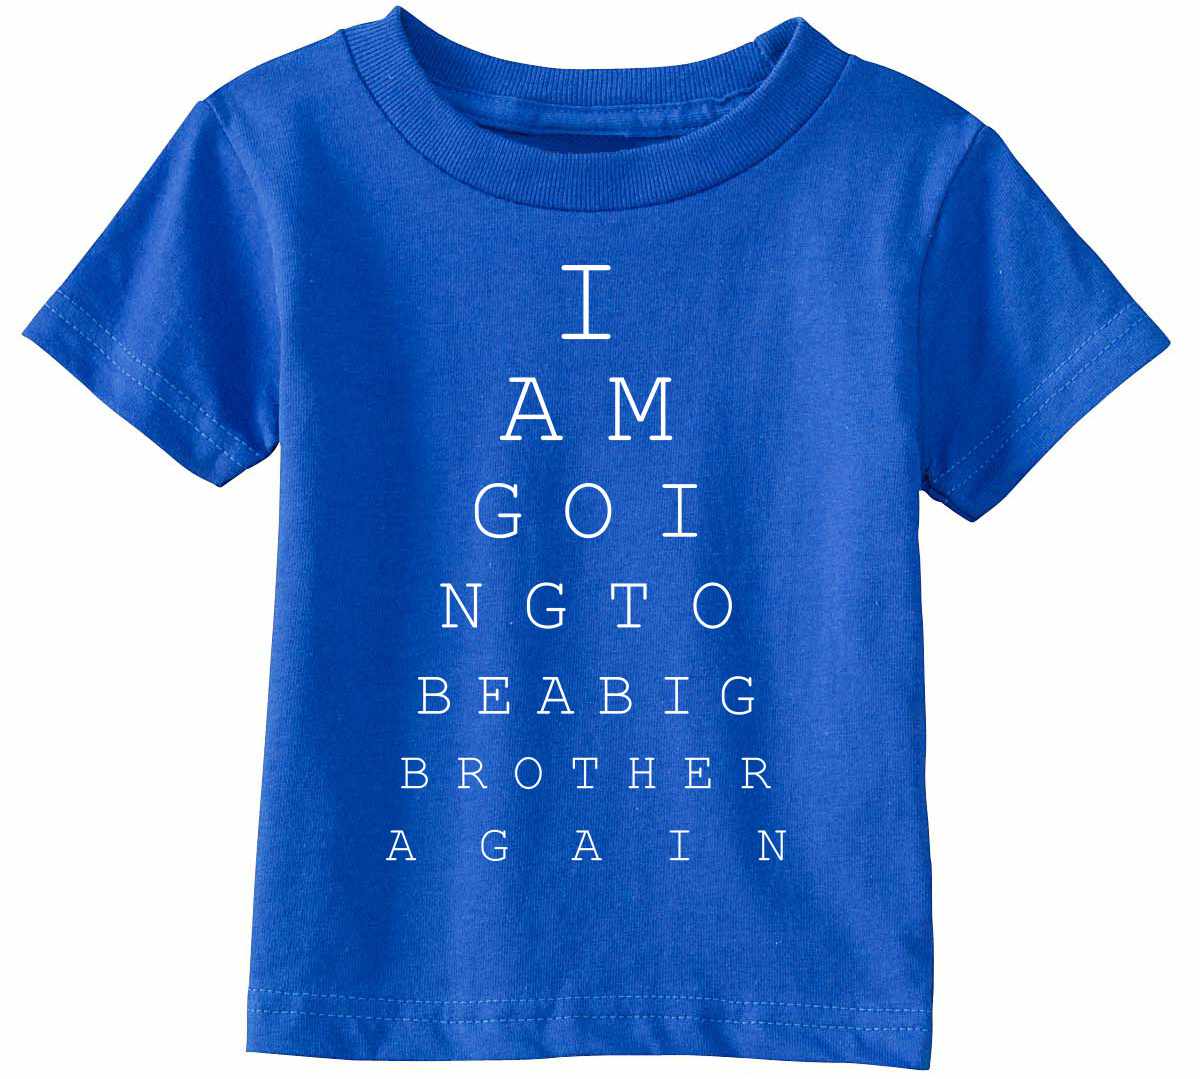 Big Brother Again Eye Chart on Infant-Toddler T-Shirt (#1265-7)